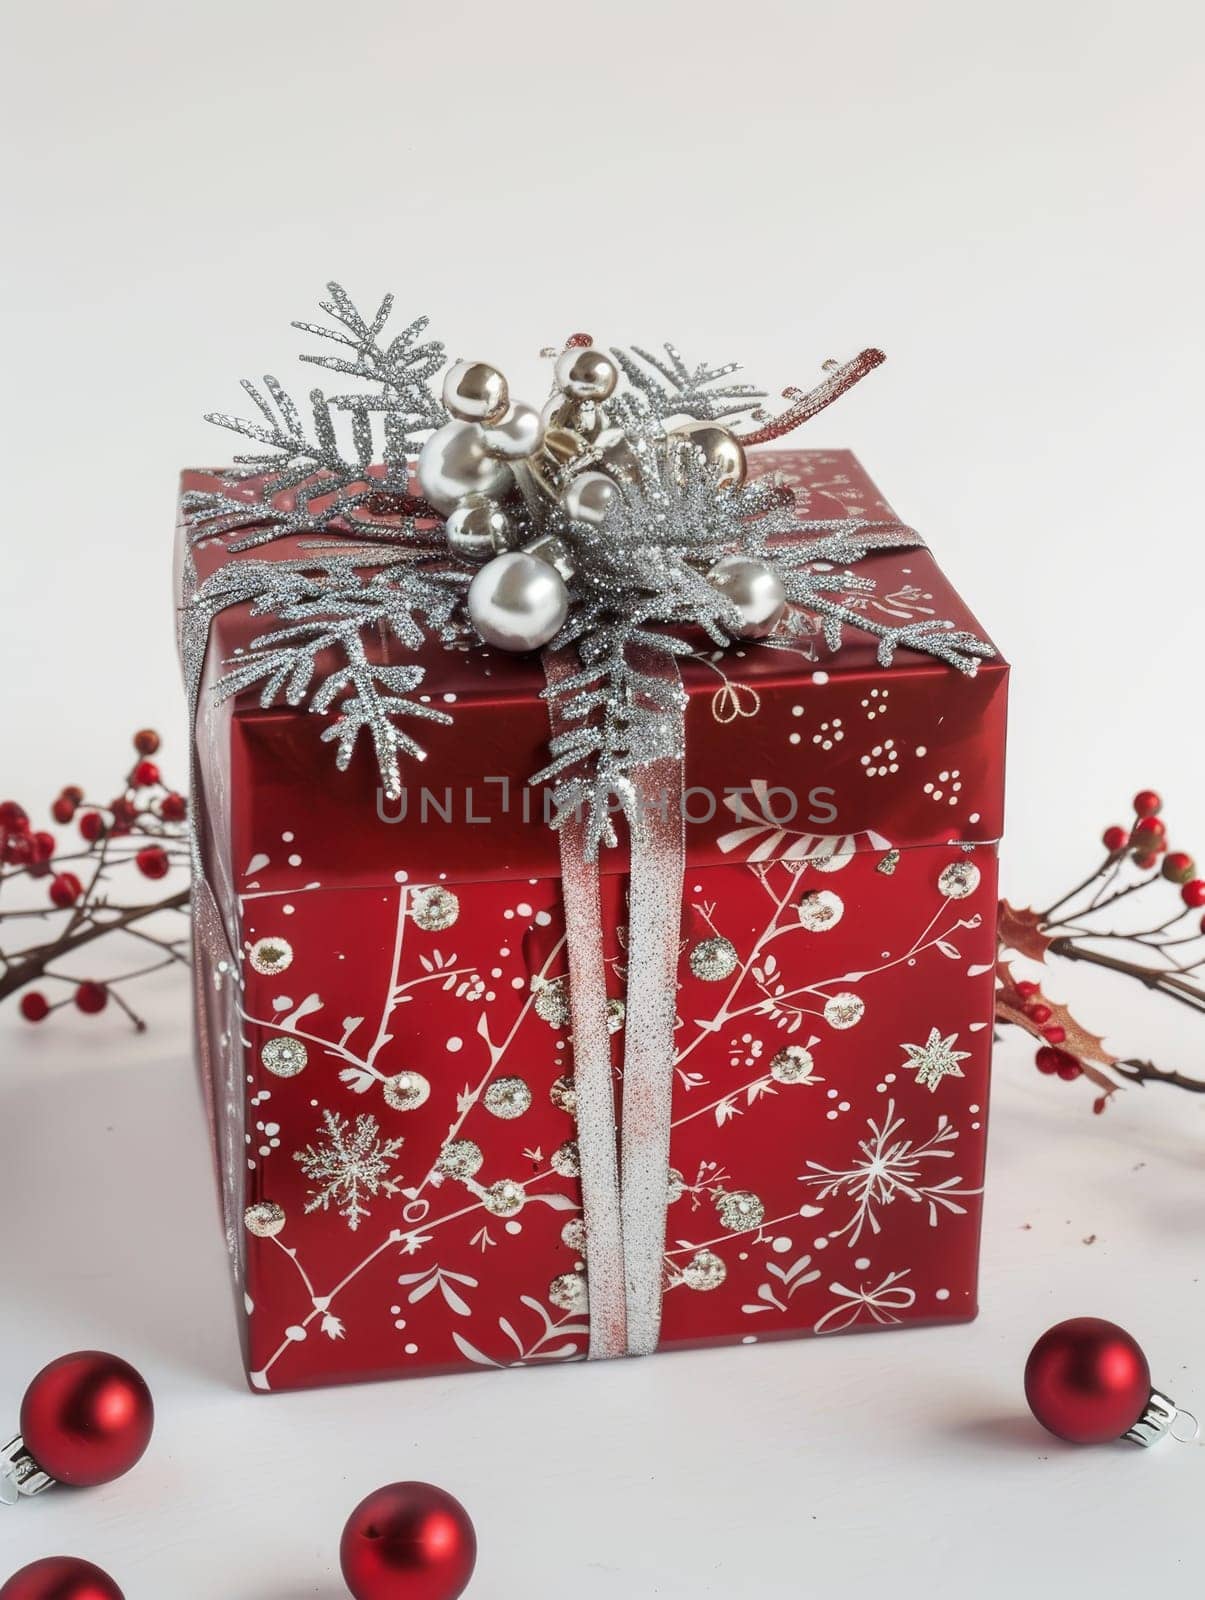 A vibrant red gift box adorned with silver snowflakes and festive baubles sits against a white backdrop. The box, tied with a shimmering silver ribbon, evokes the warmth of holiday cheer